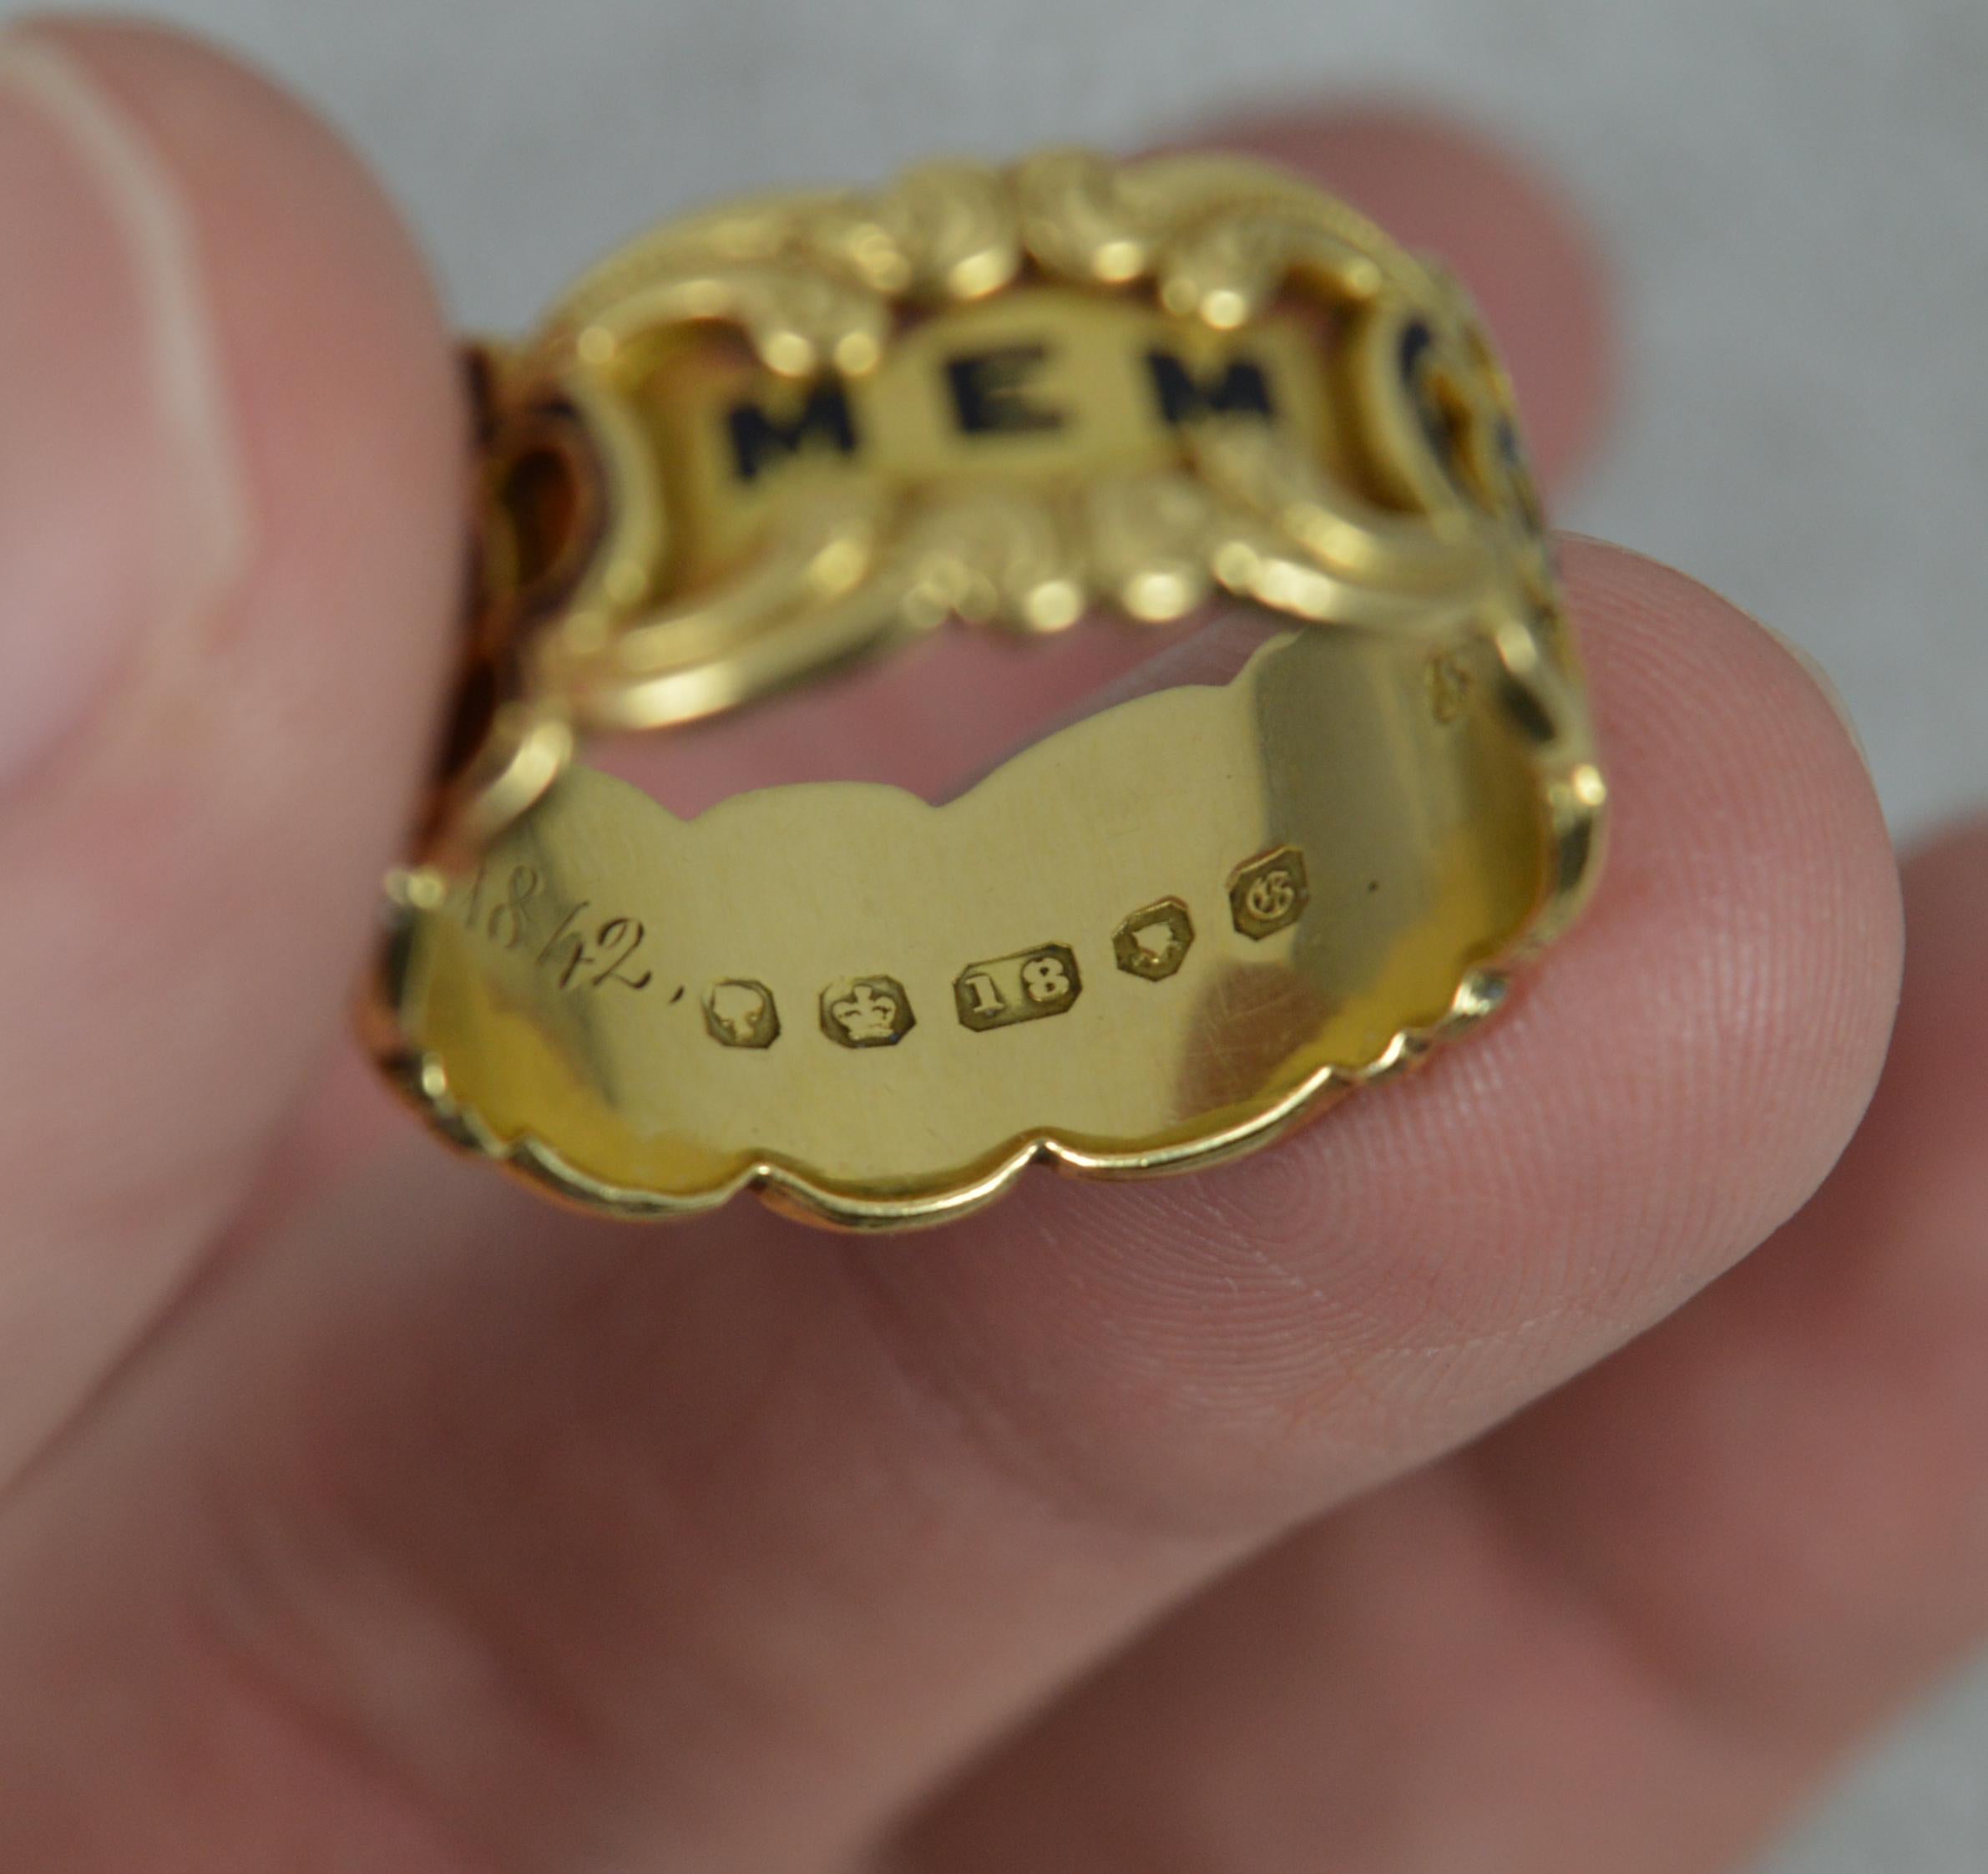 1842 Victorian 18 Carat Gold Enamel In Memory of Mourning Band Ring In Excellent Condition For Sale In St Helens, GB